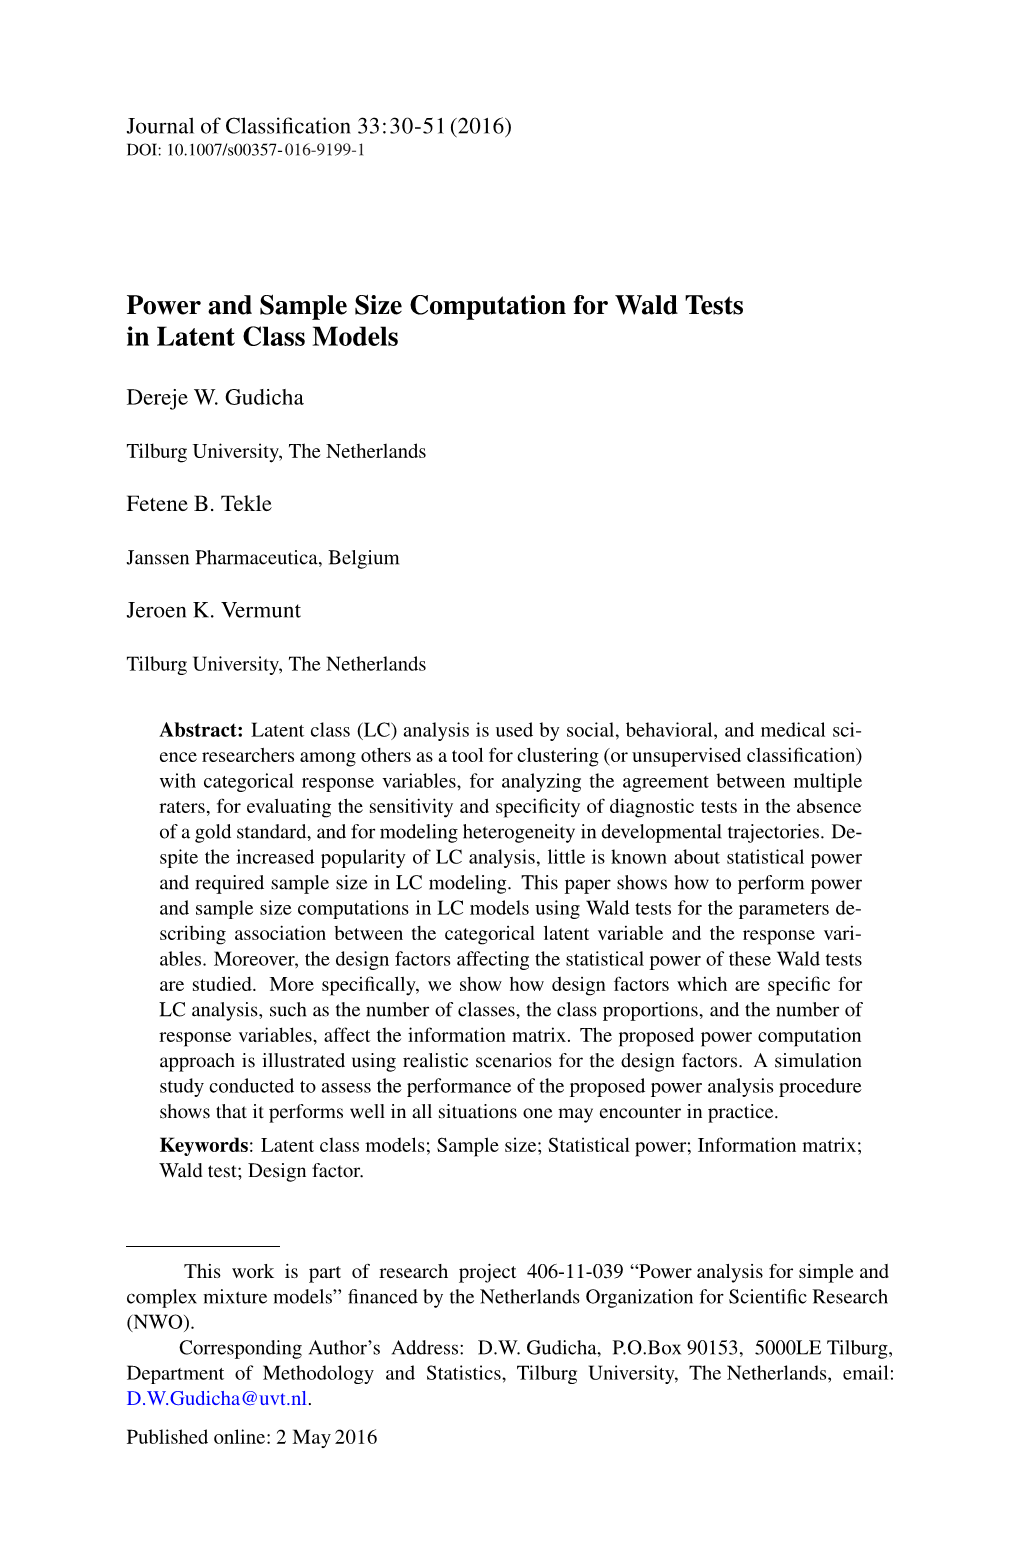 Power and Sample Size Computation for Wald Tests in Latent Class Models